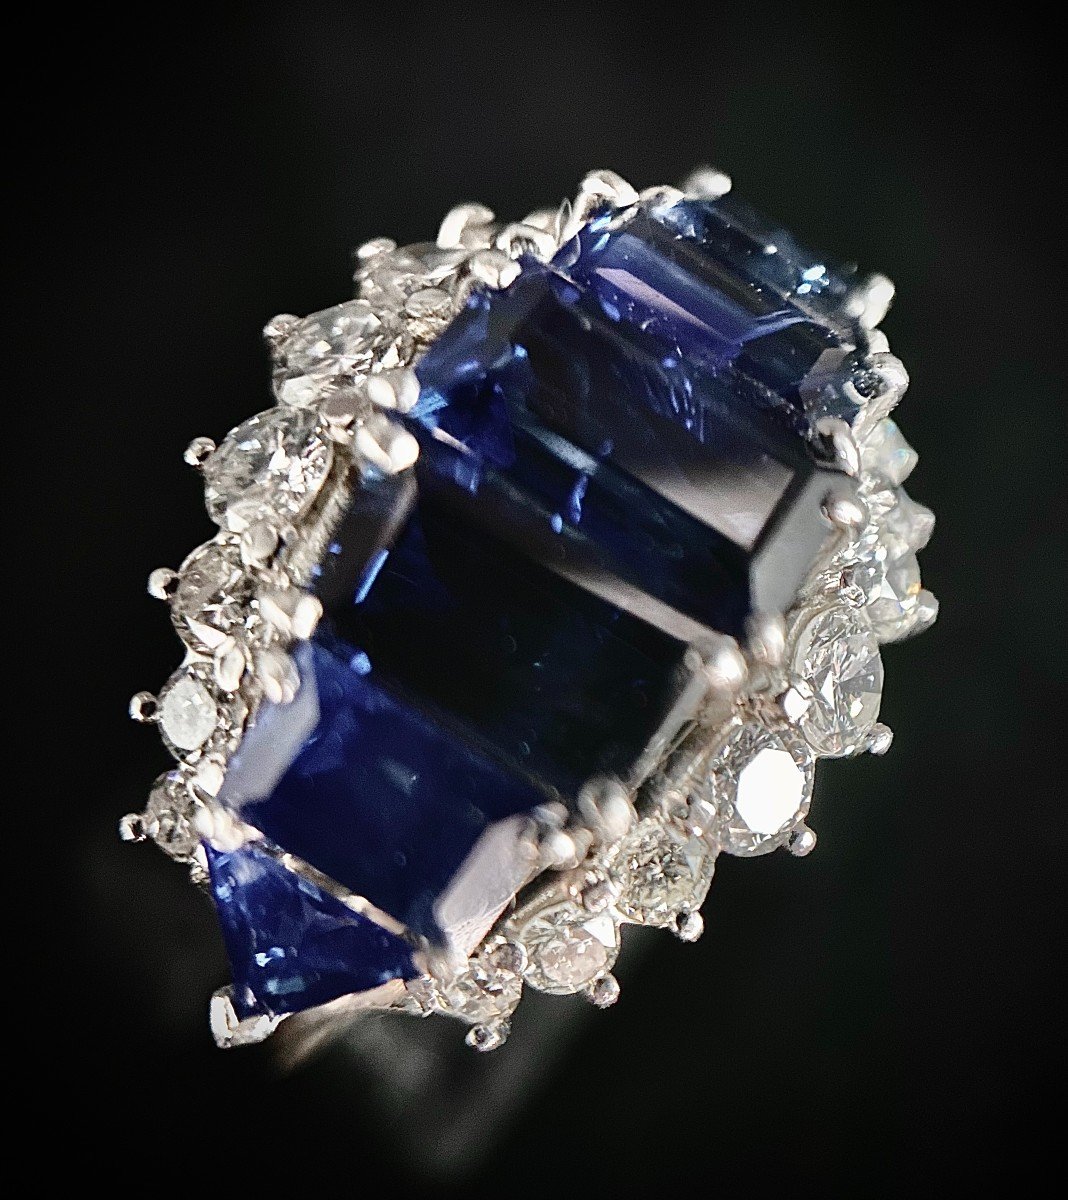 Platinum Ring Adorned With 7 Sapphires Totaling 5 Carats And 1.50 Carats Of Diamonds-photo-1